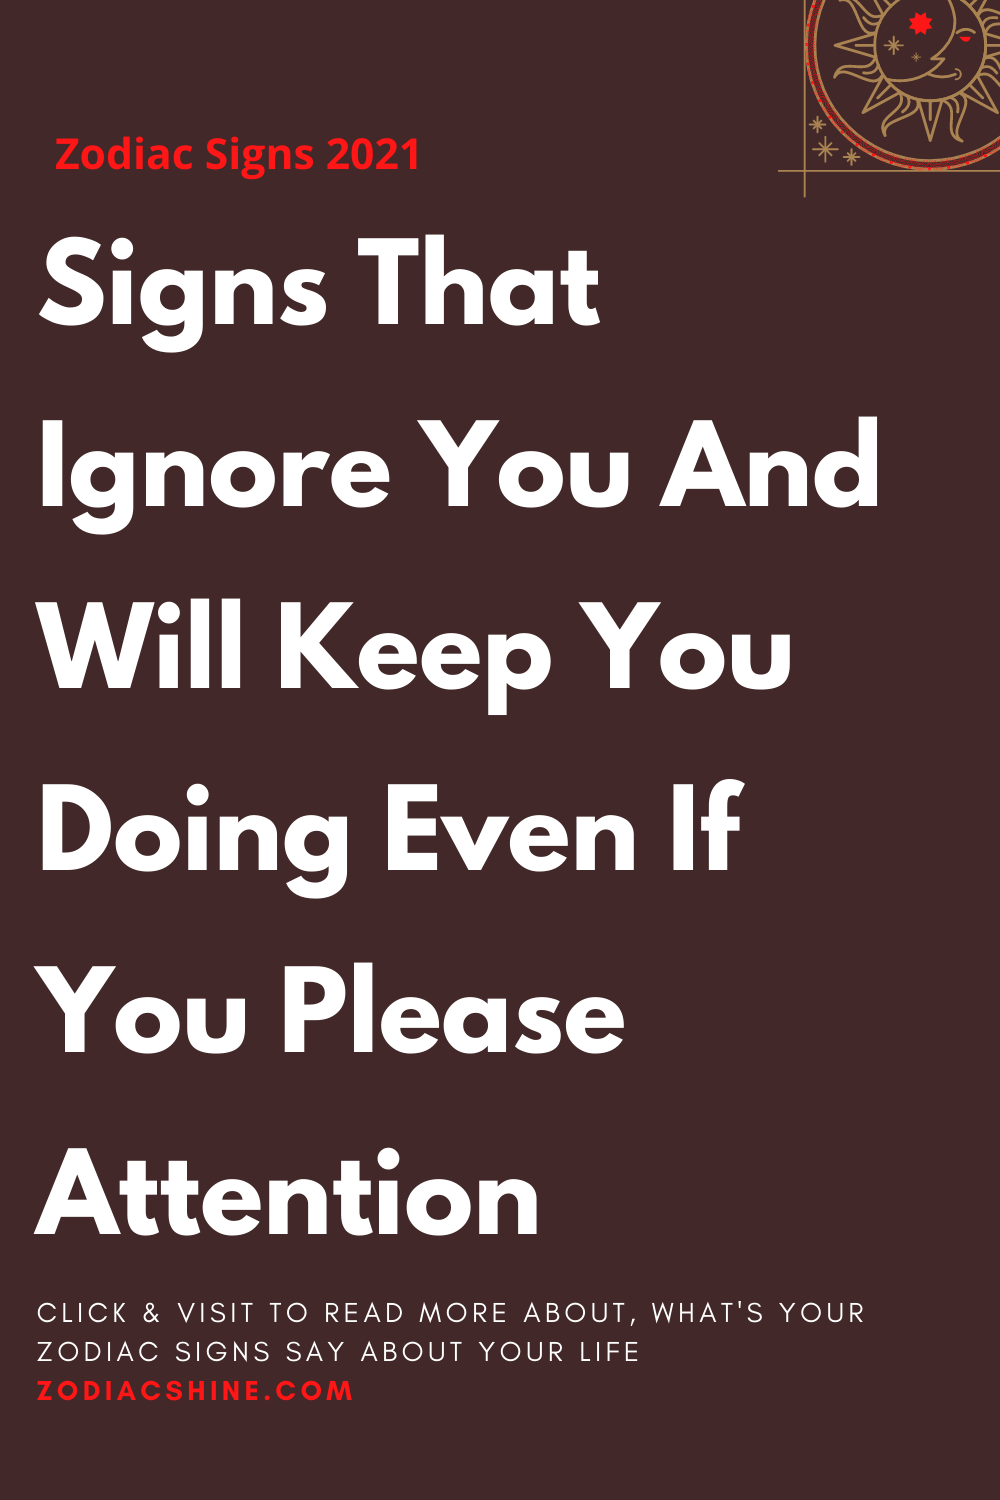 Signs That Ignore You And Will Keep You Doing Even If You Please Attention